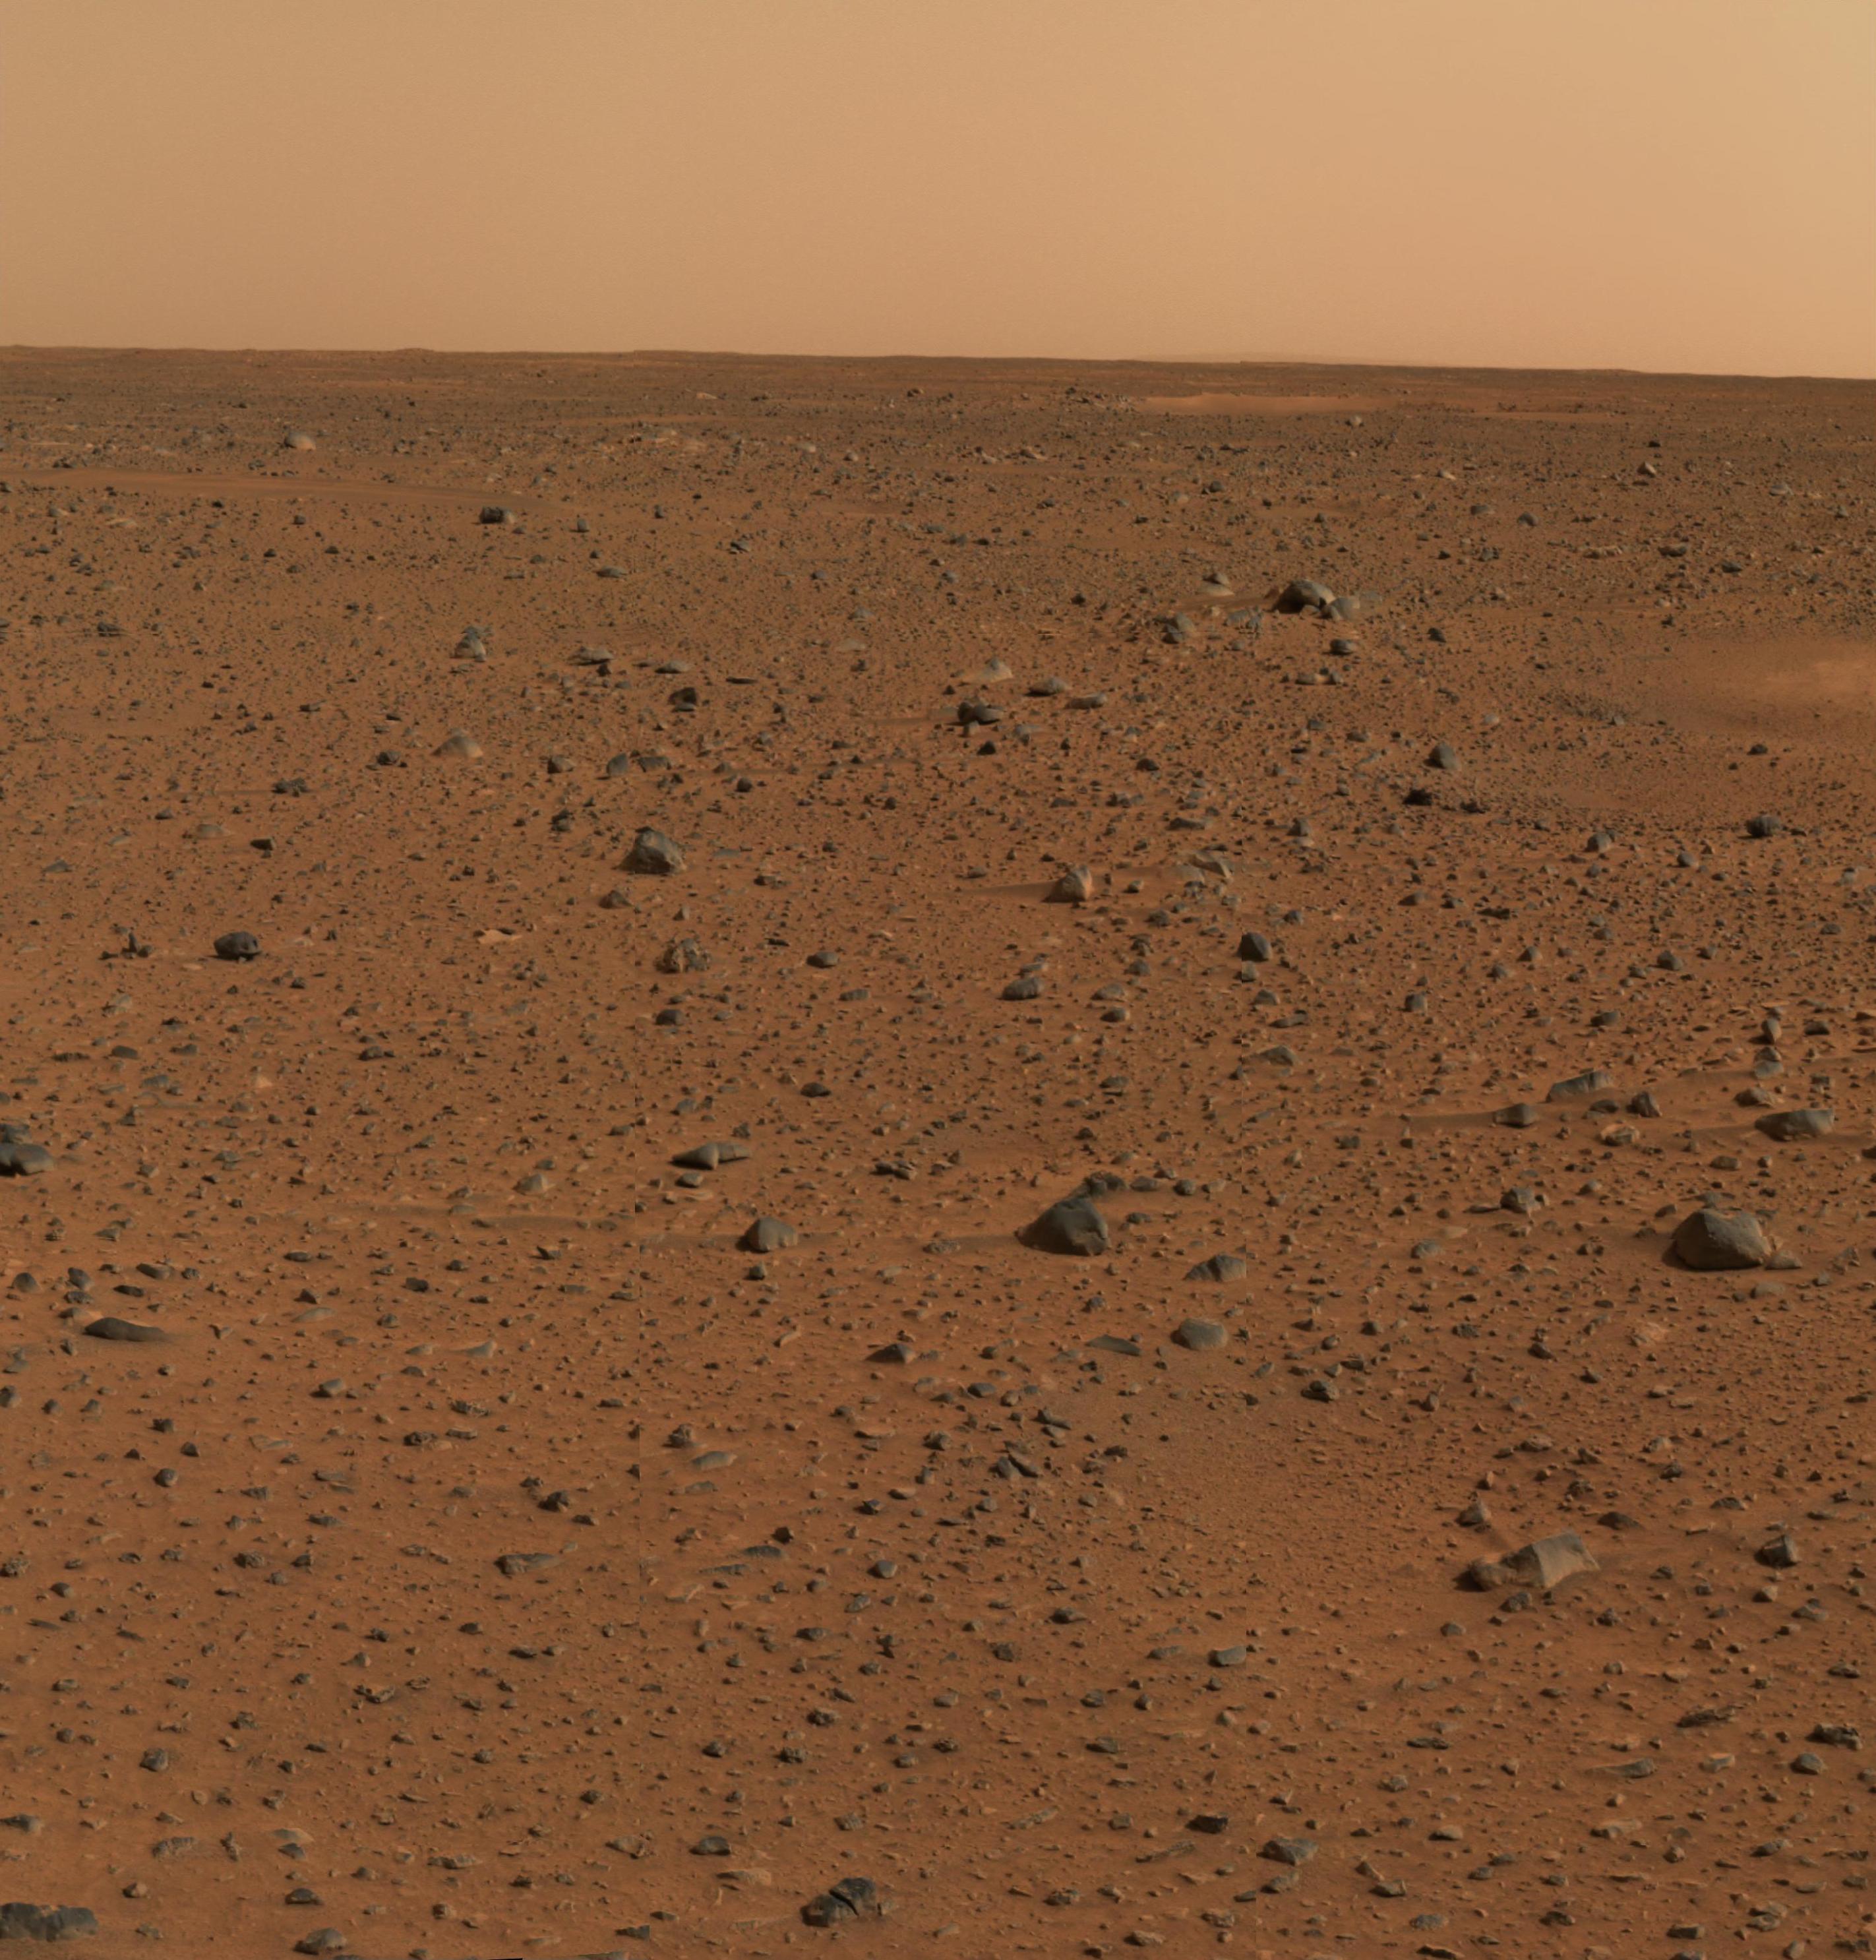 Spirit captured this color image of the surface of Mars from its landing point at Columbia Memorial Station. The horizon is approximately 3 kilometers (1.9 miles) distant. (NASA)